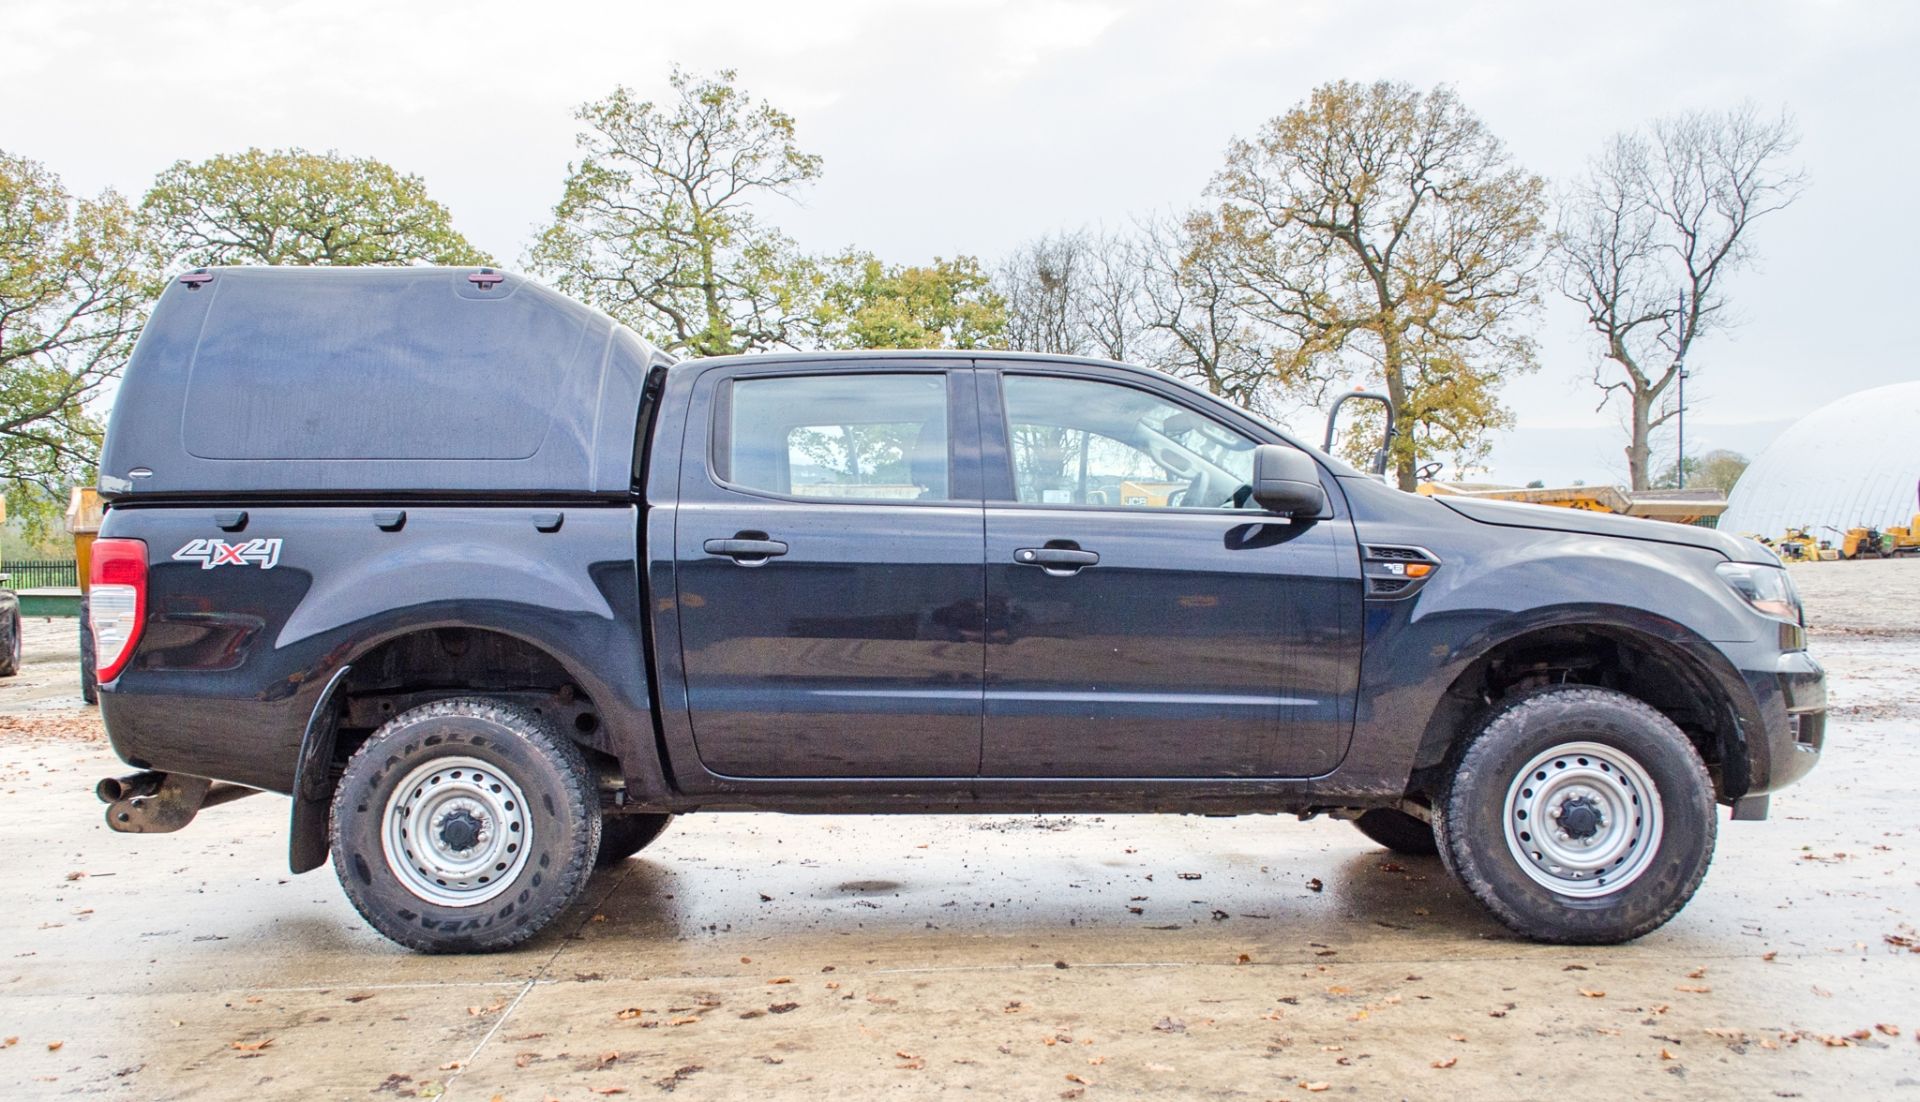 Ford Ranger 2.2 TDCI 160 XL double cab pick up (Ex MOD) VIN: 6FPPXXMJ2PHU42742 Date of Entry into - Image 8 of 32